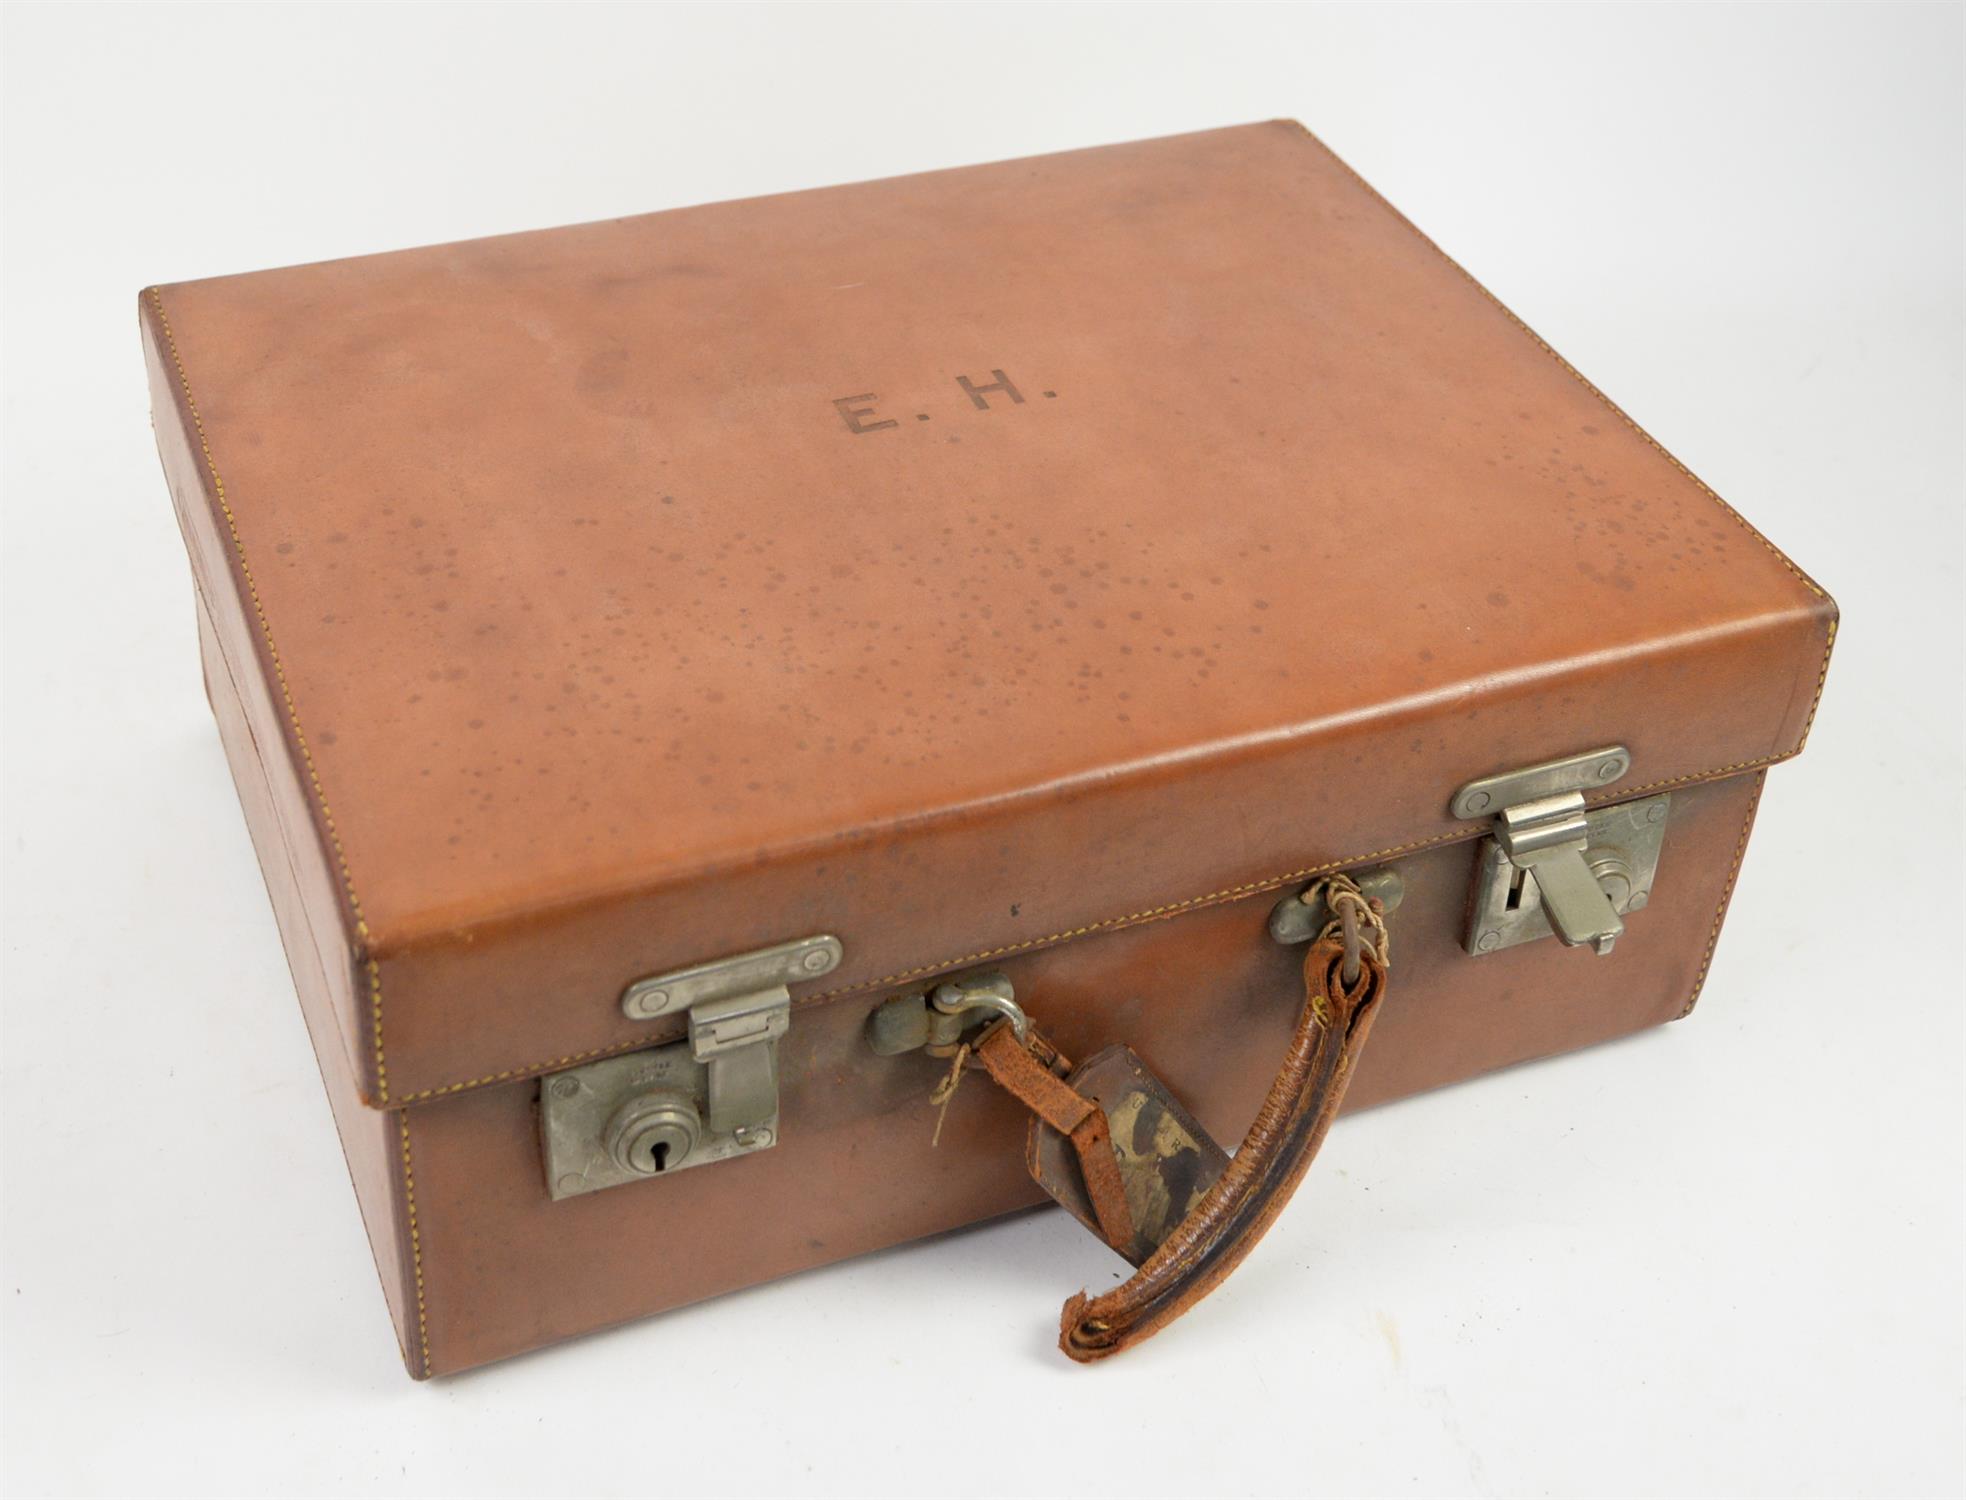 Early 20th century brown leather luggage vanity case with monogram E.H., marked for John Pound,